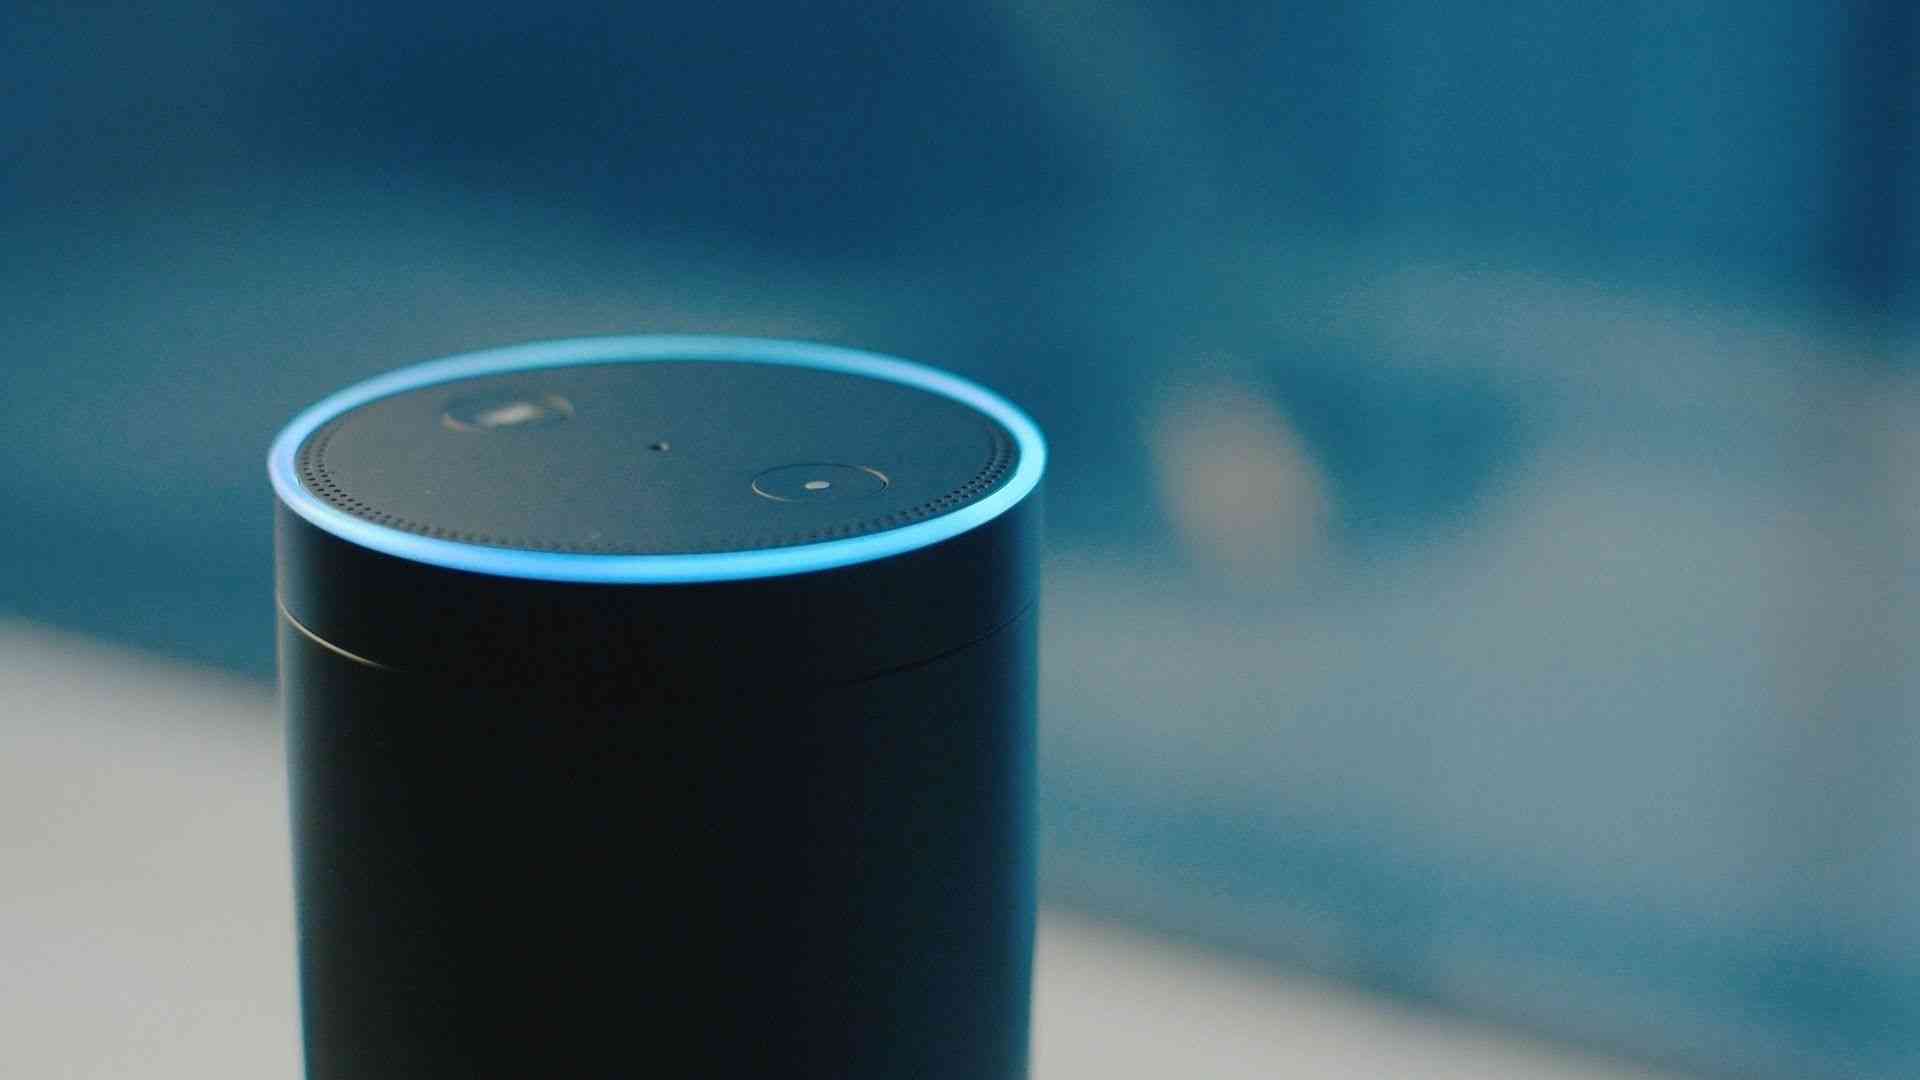 amazon saves a transcript of your conversations with alexa 2421 big 1